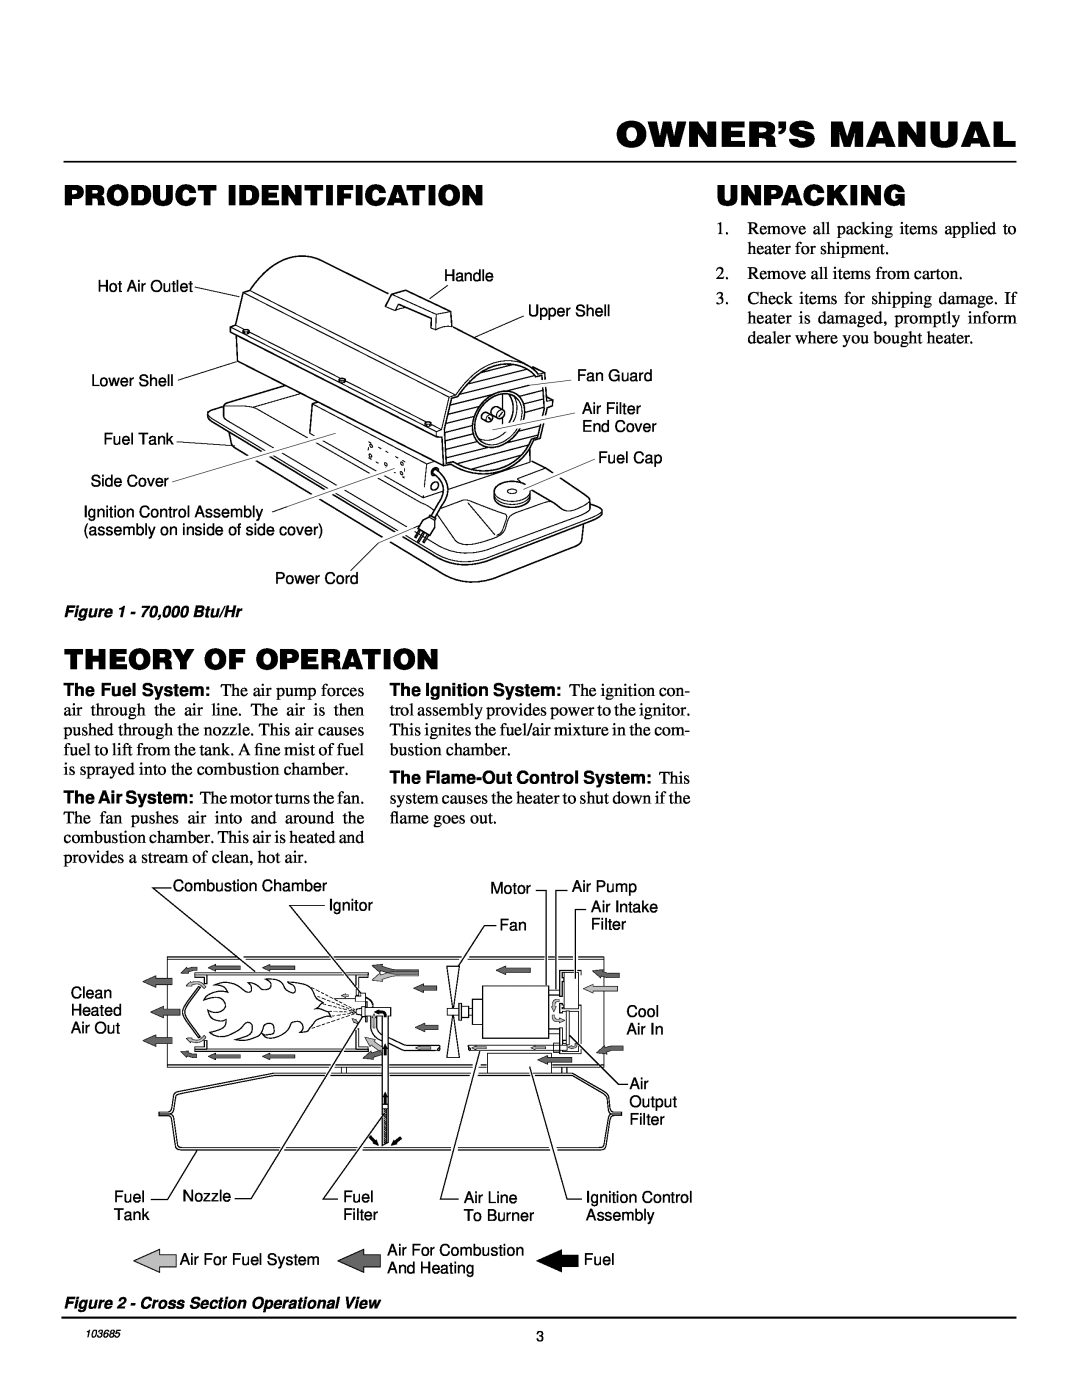 Desa R70D, B70D owner manual Product Identification, Unpacking, Theory Of Operation 